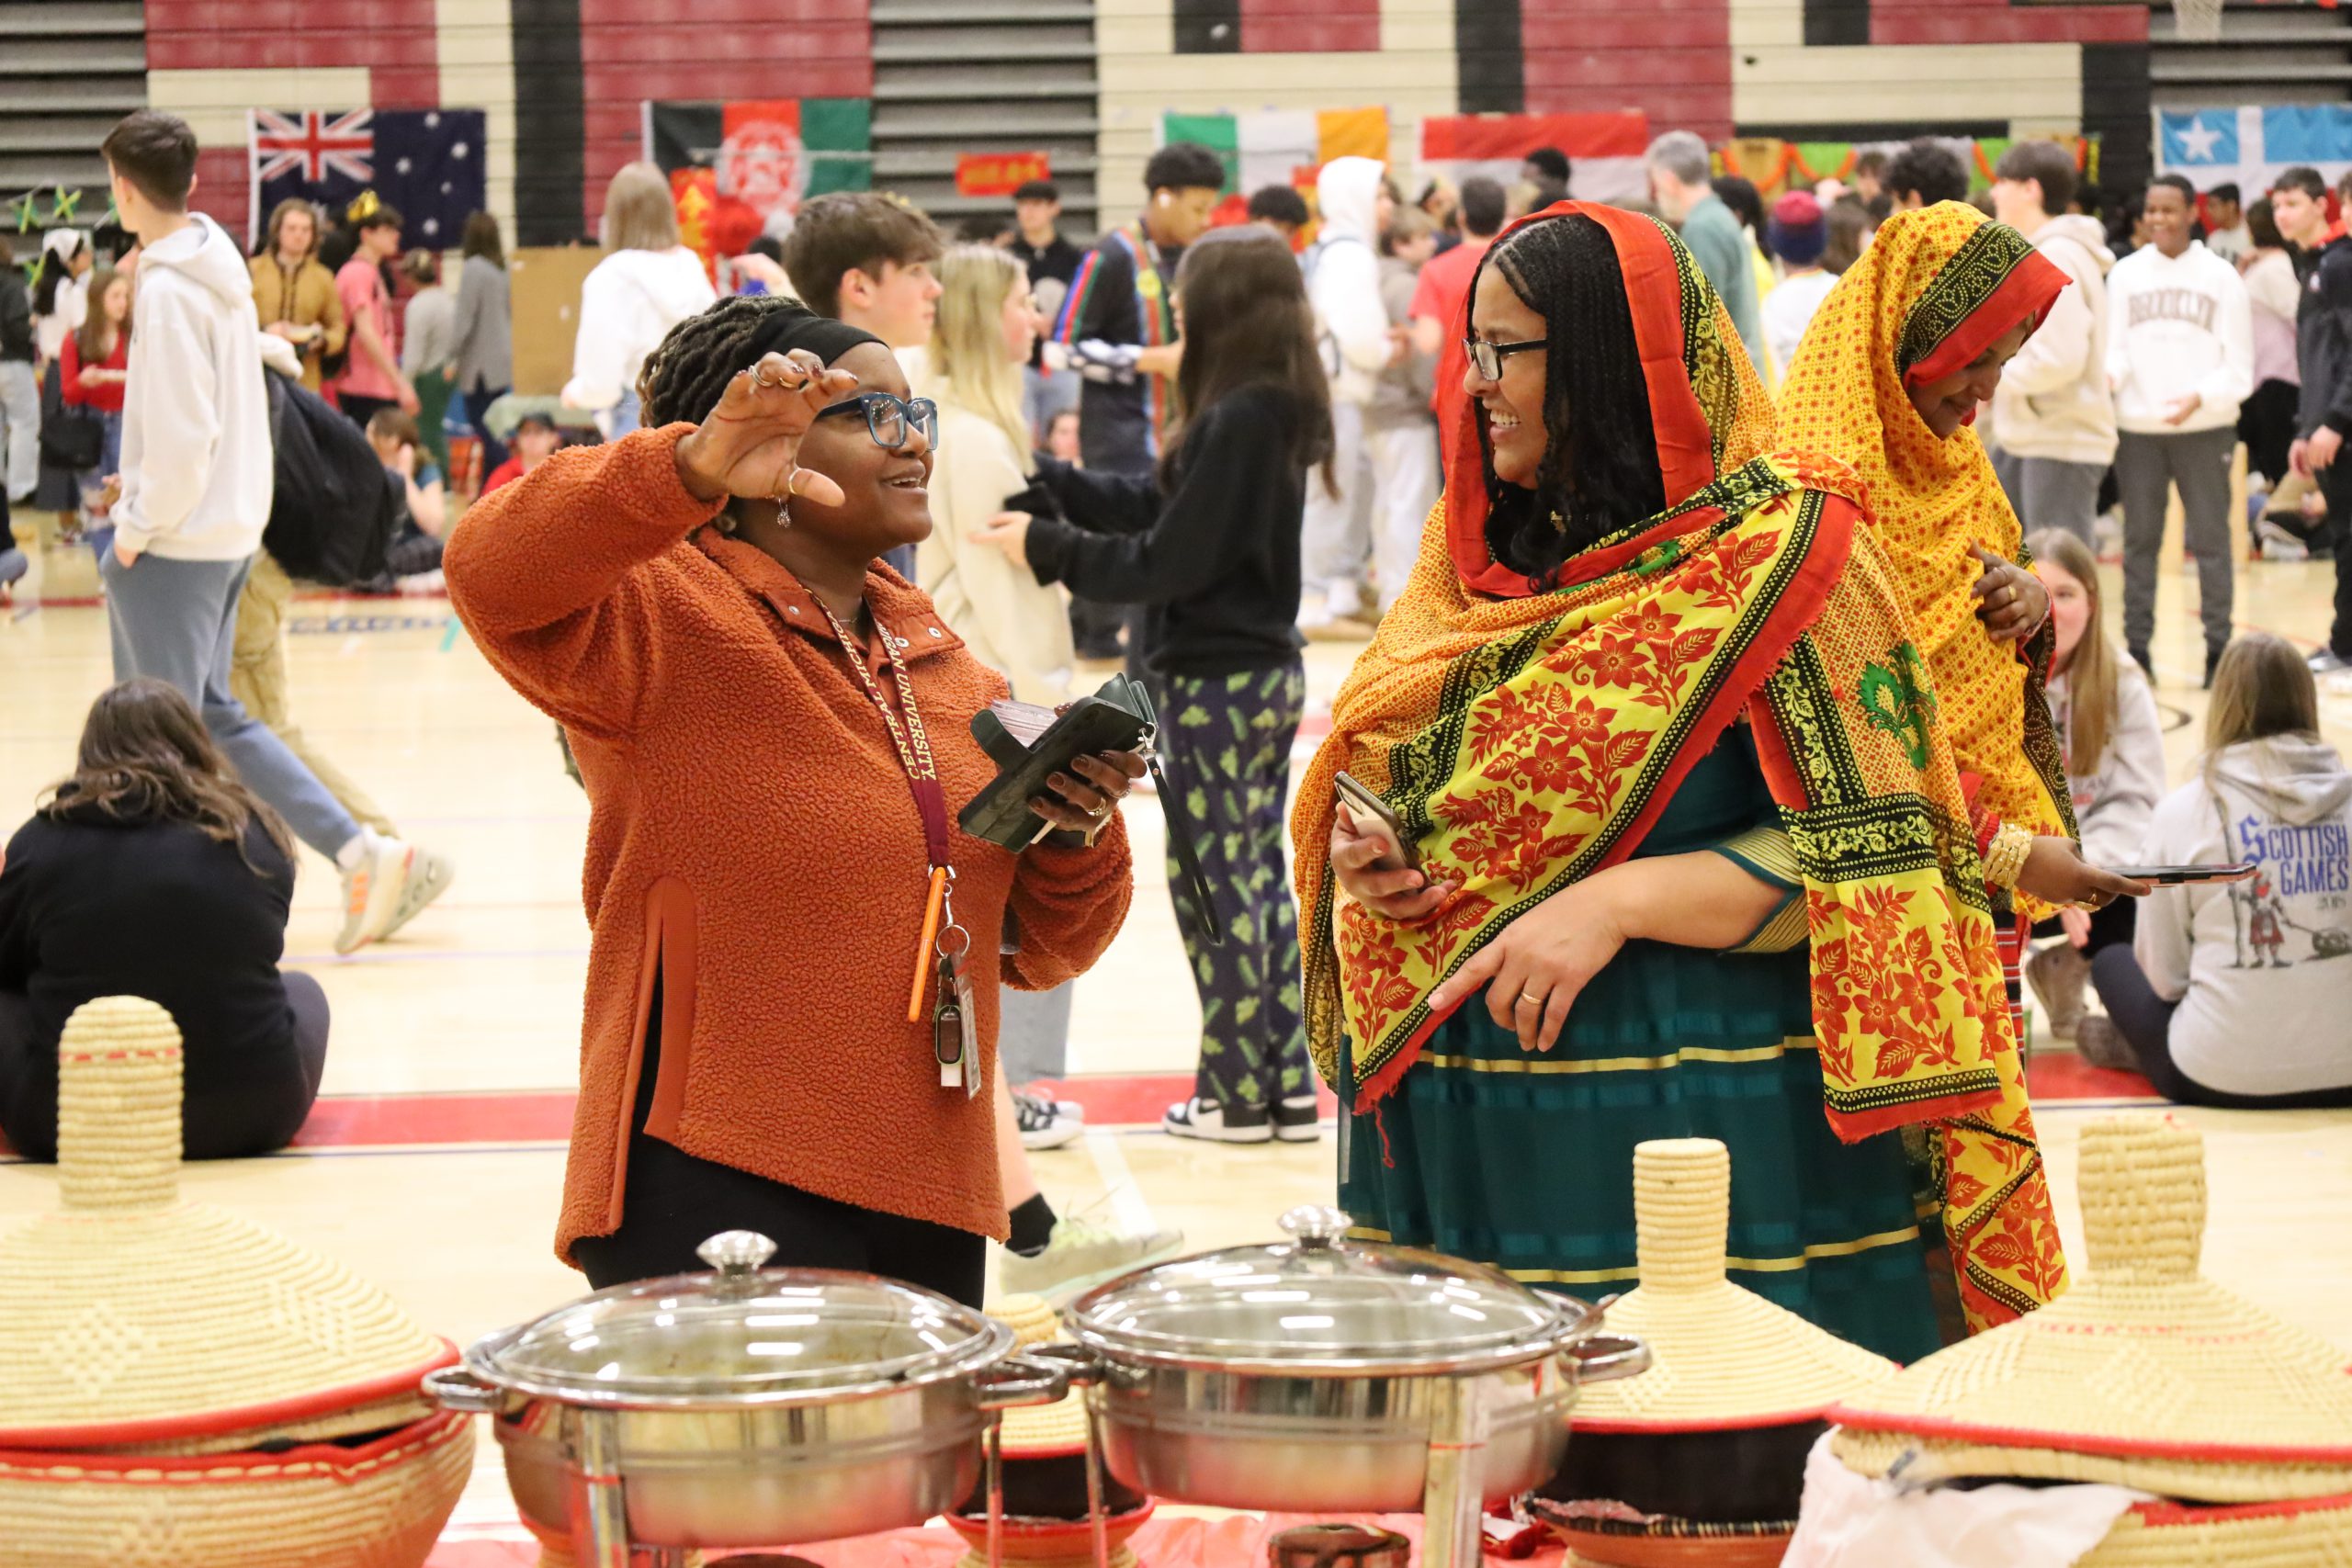 Two people speak in a gymnasium. They are standing next to a table that has straw baskets and food serving dishes. One is wearing traditional clothing and a scarf wrapped around her head